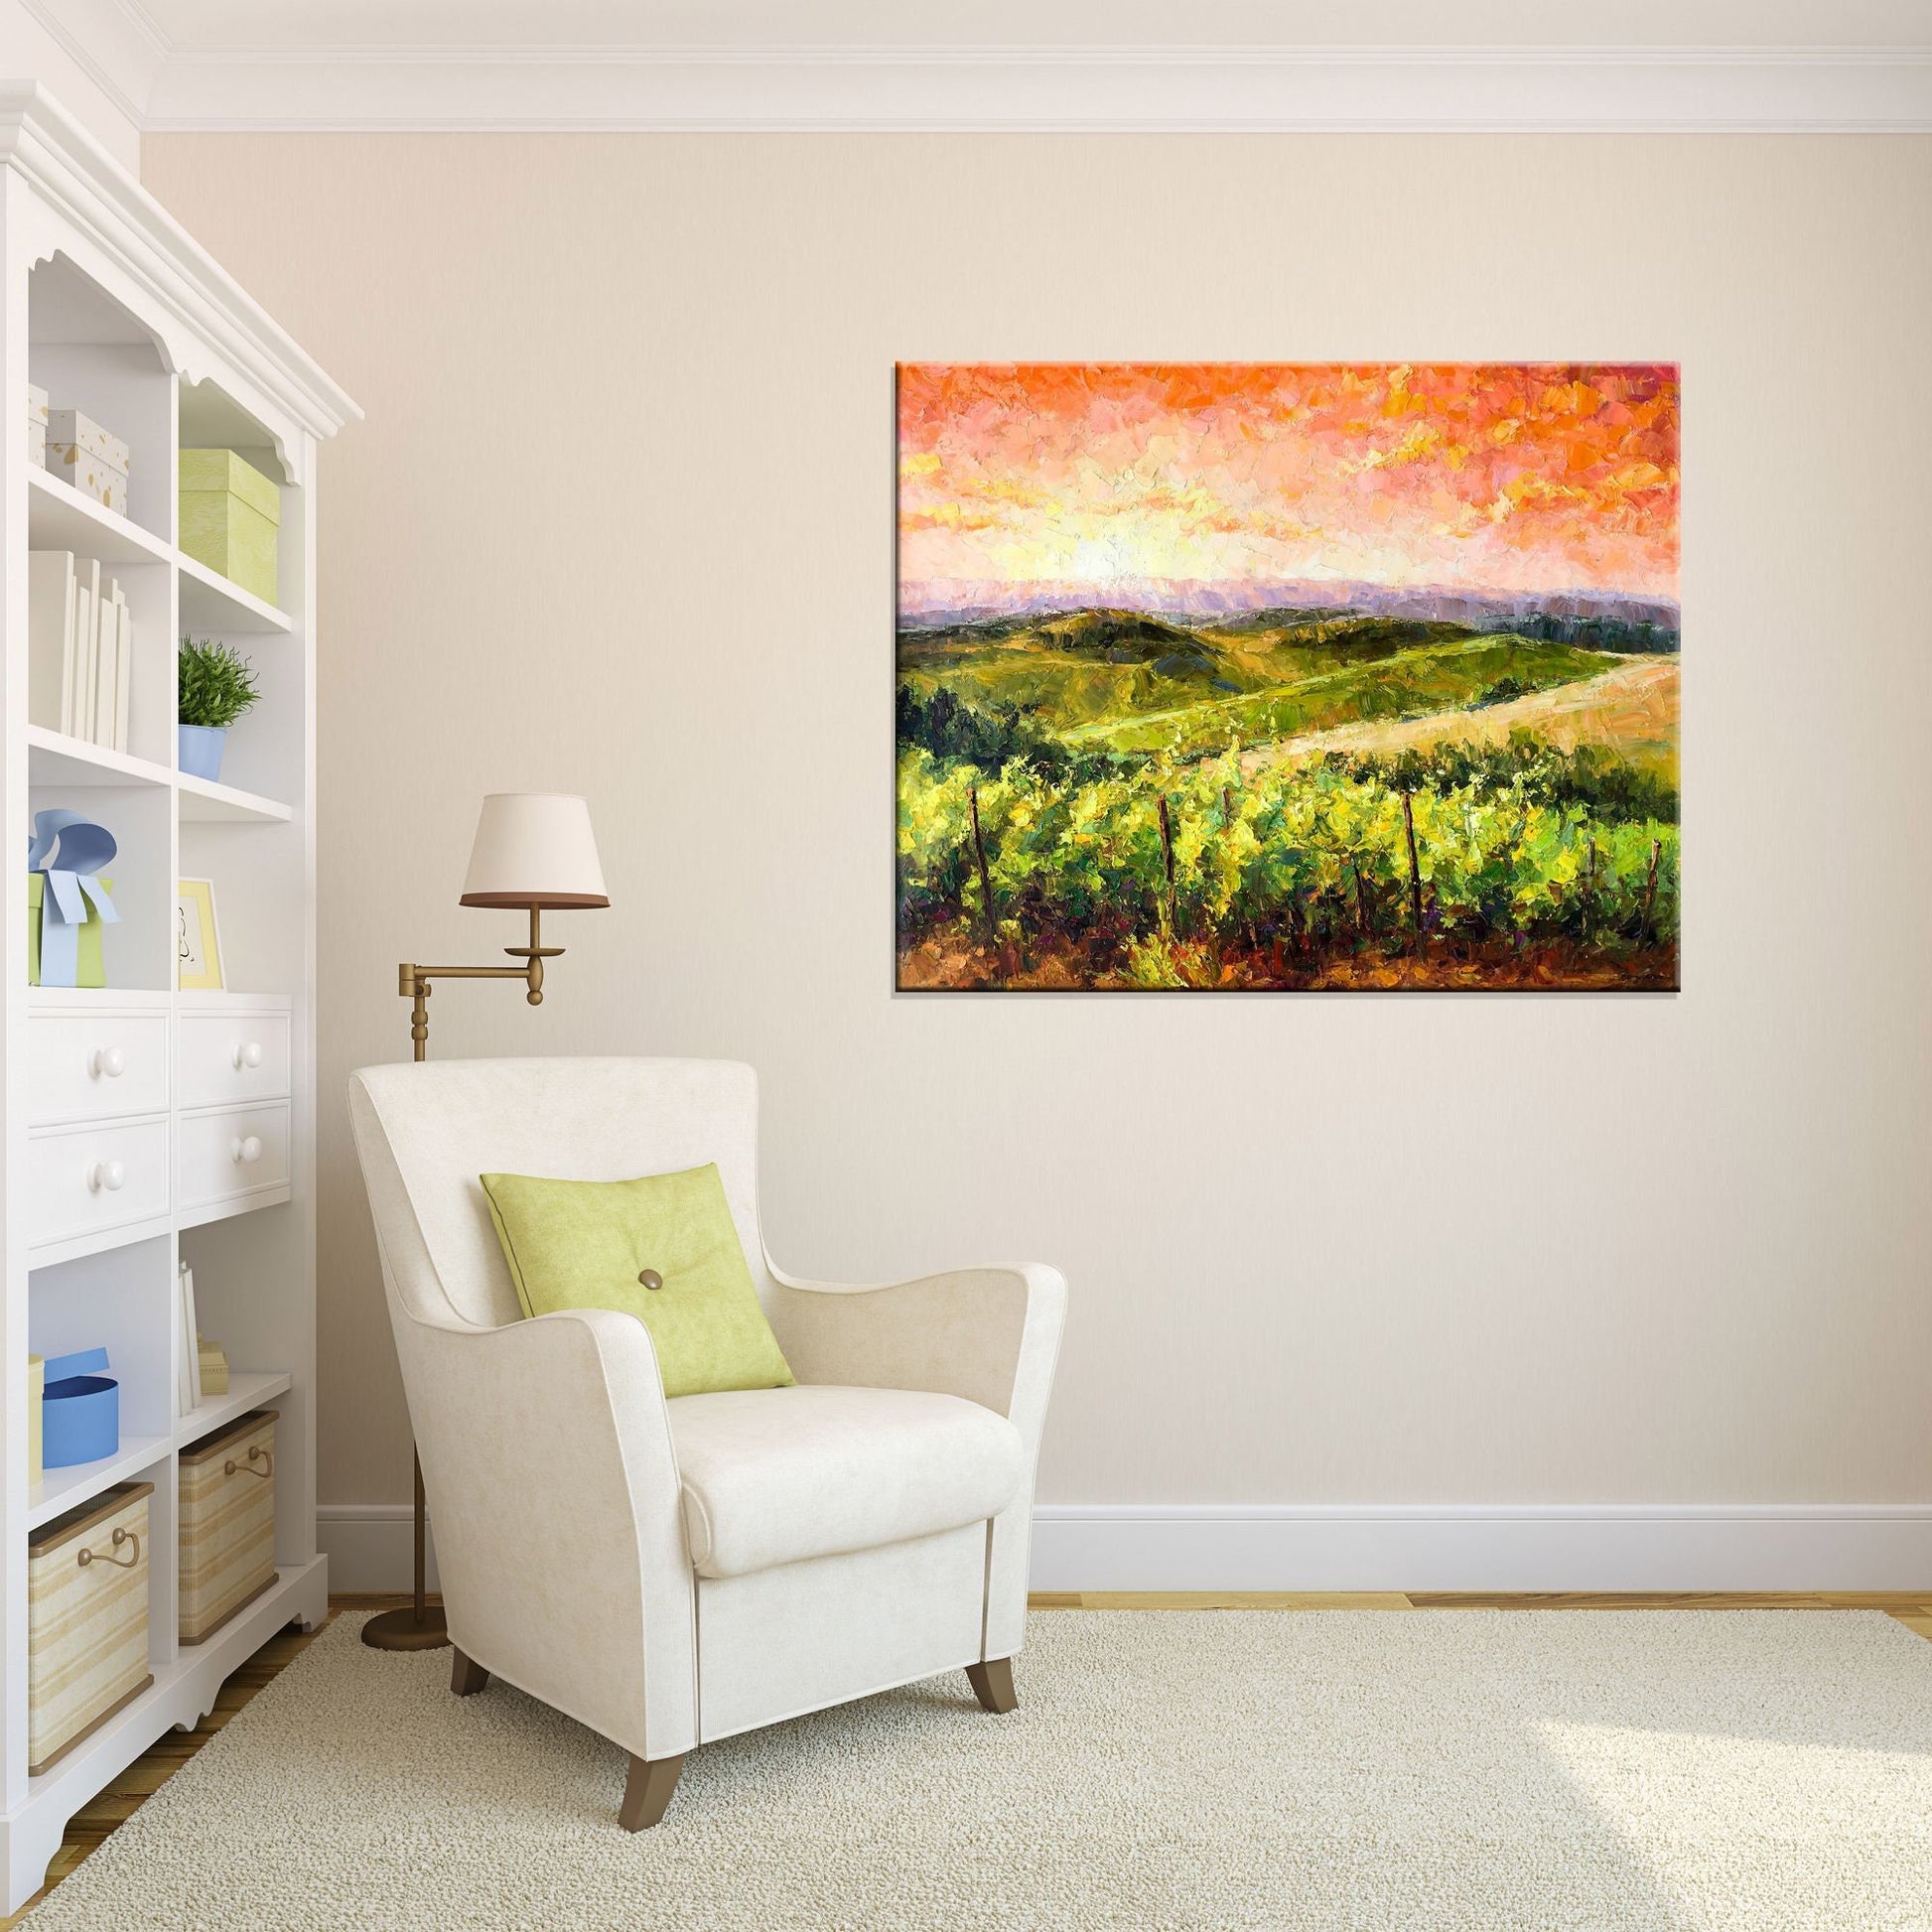 Landscape Painting, Oil Painting Tuscany Vineyard Sunset, Living Room Decor, Large  Wall Art, Modern Painting, Abstract Canvas Painting